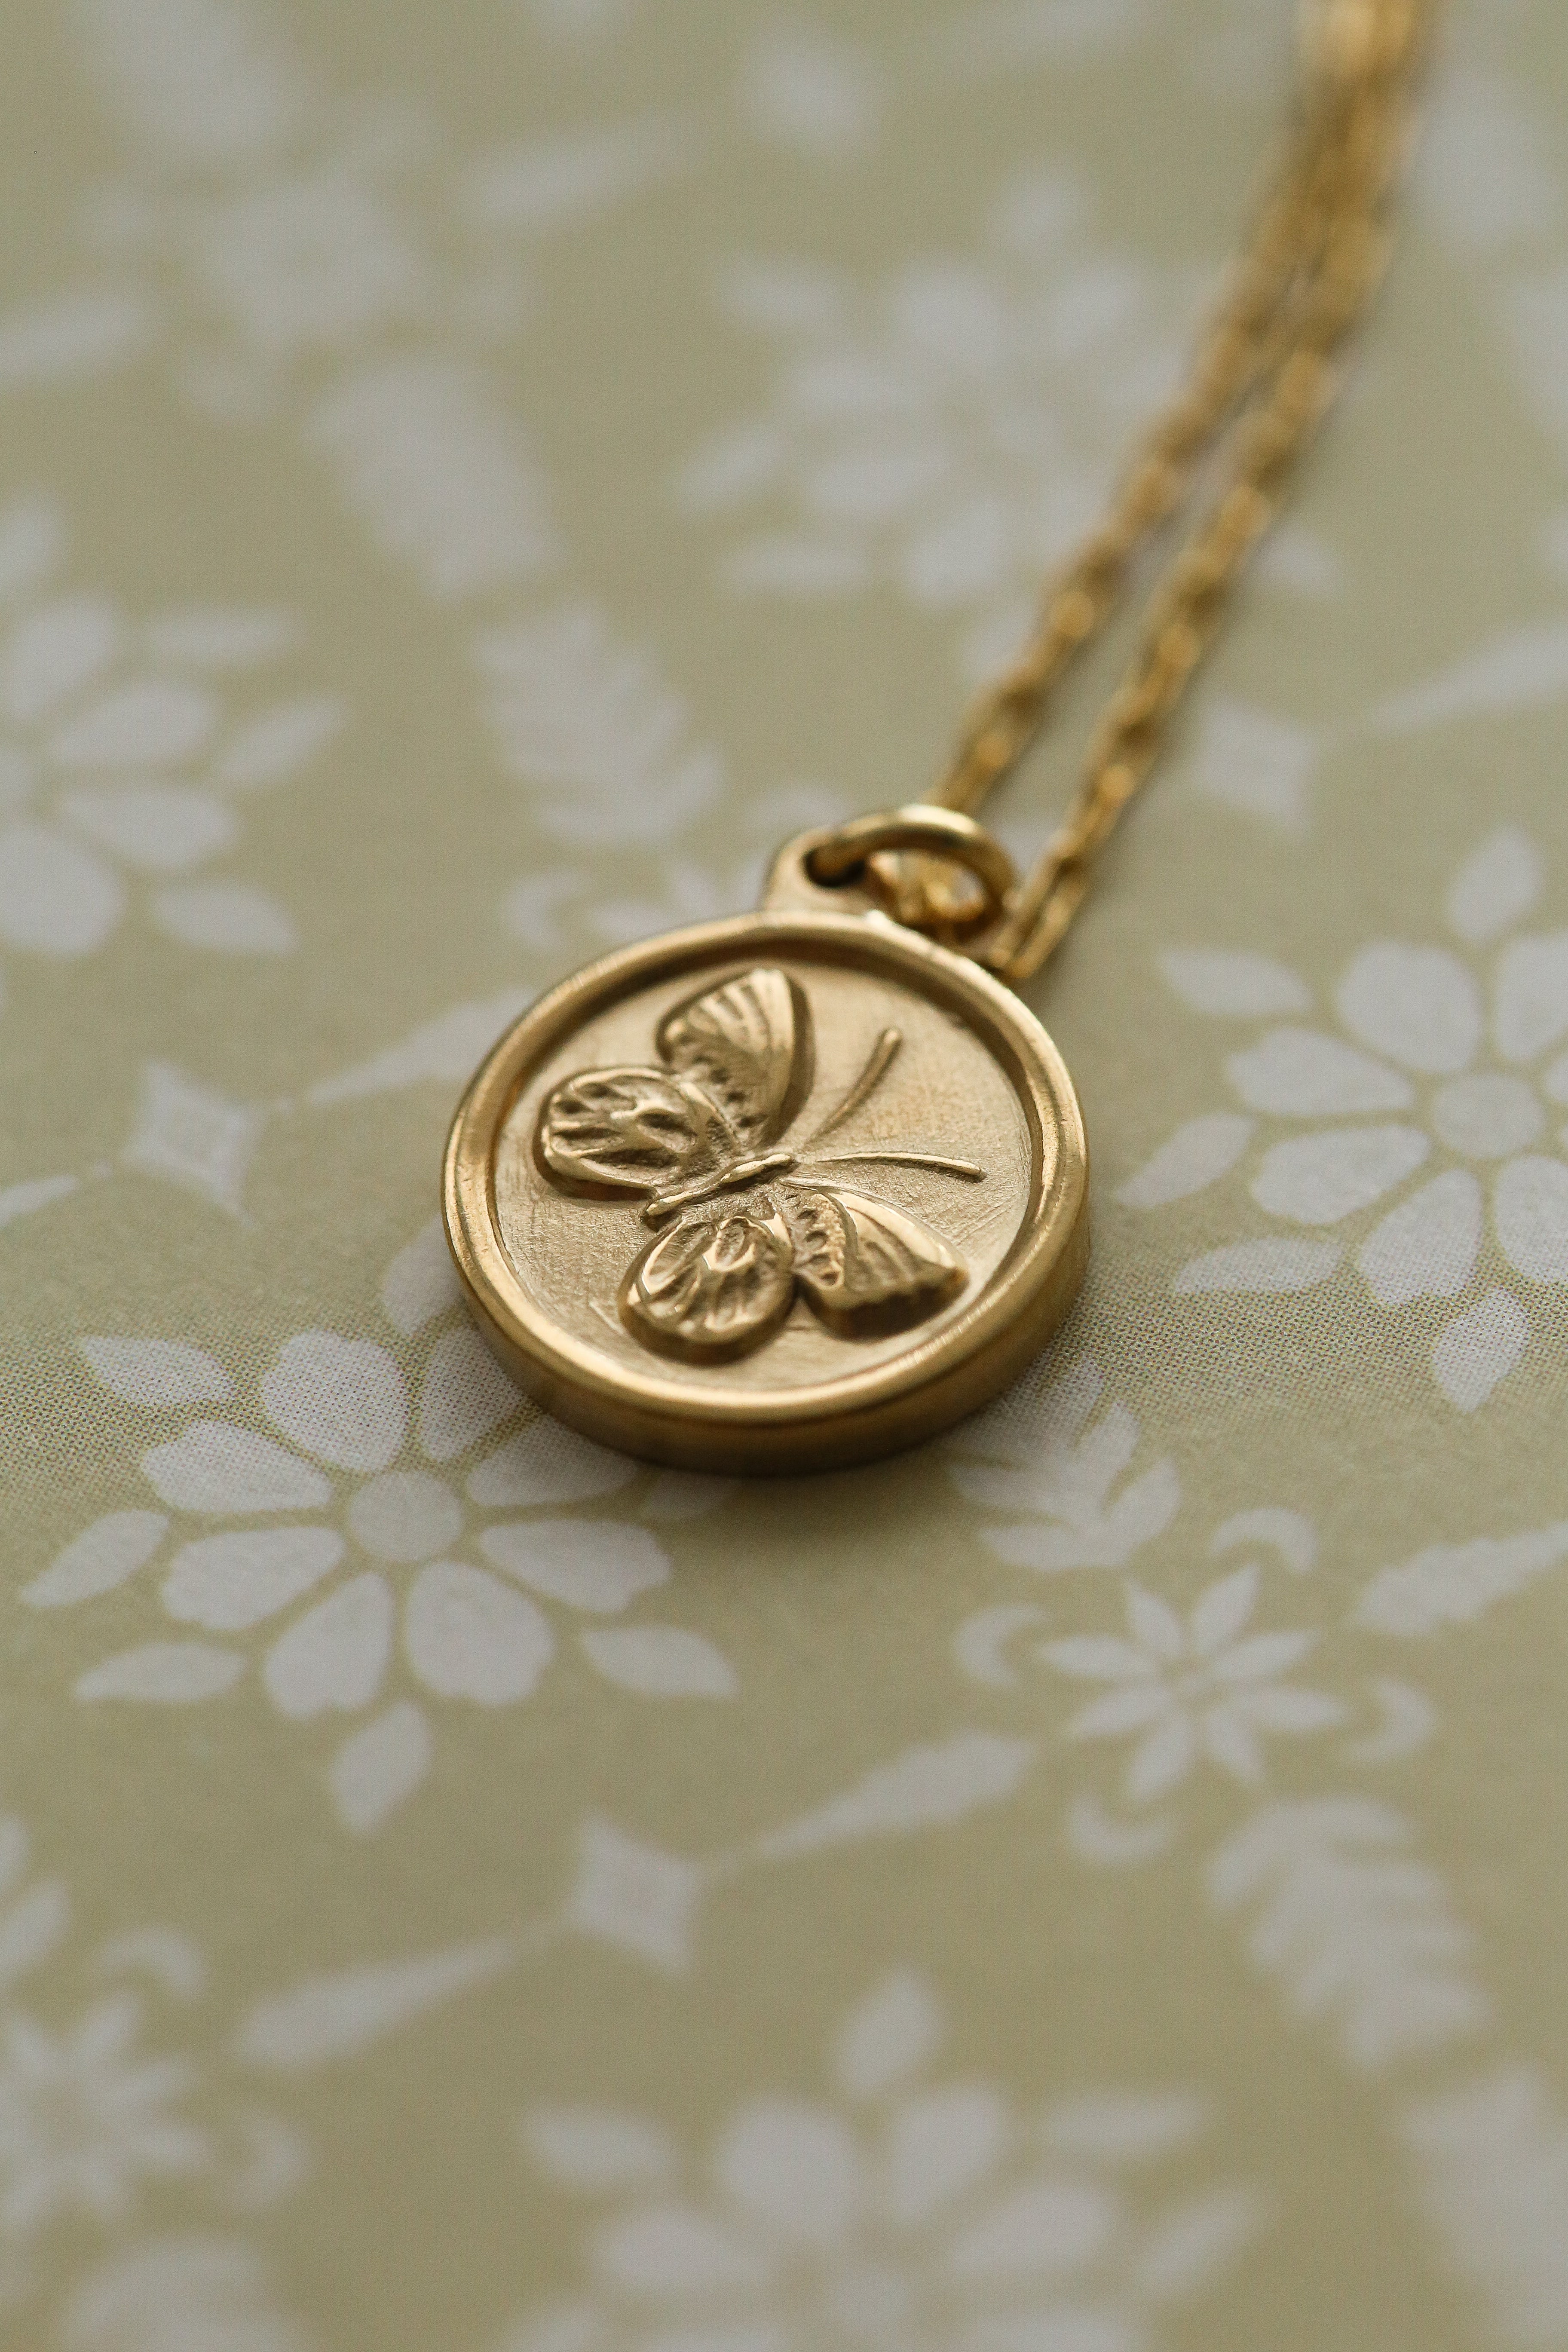 Verity (children) Necklace - Boutique Minimaliste has waterproof, durable, elegant and vintage inspired jewelry